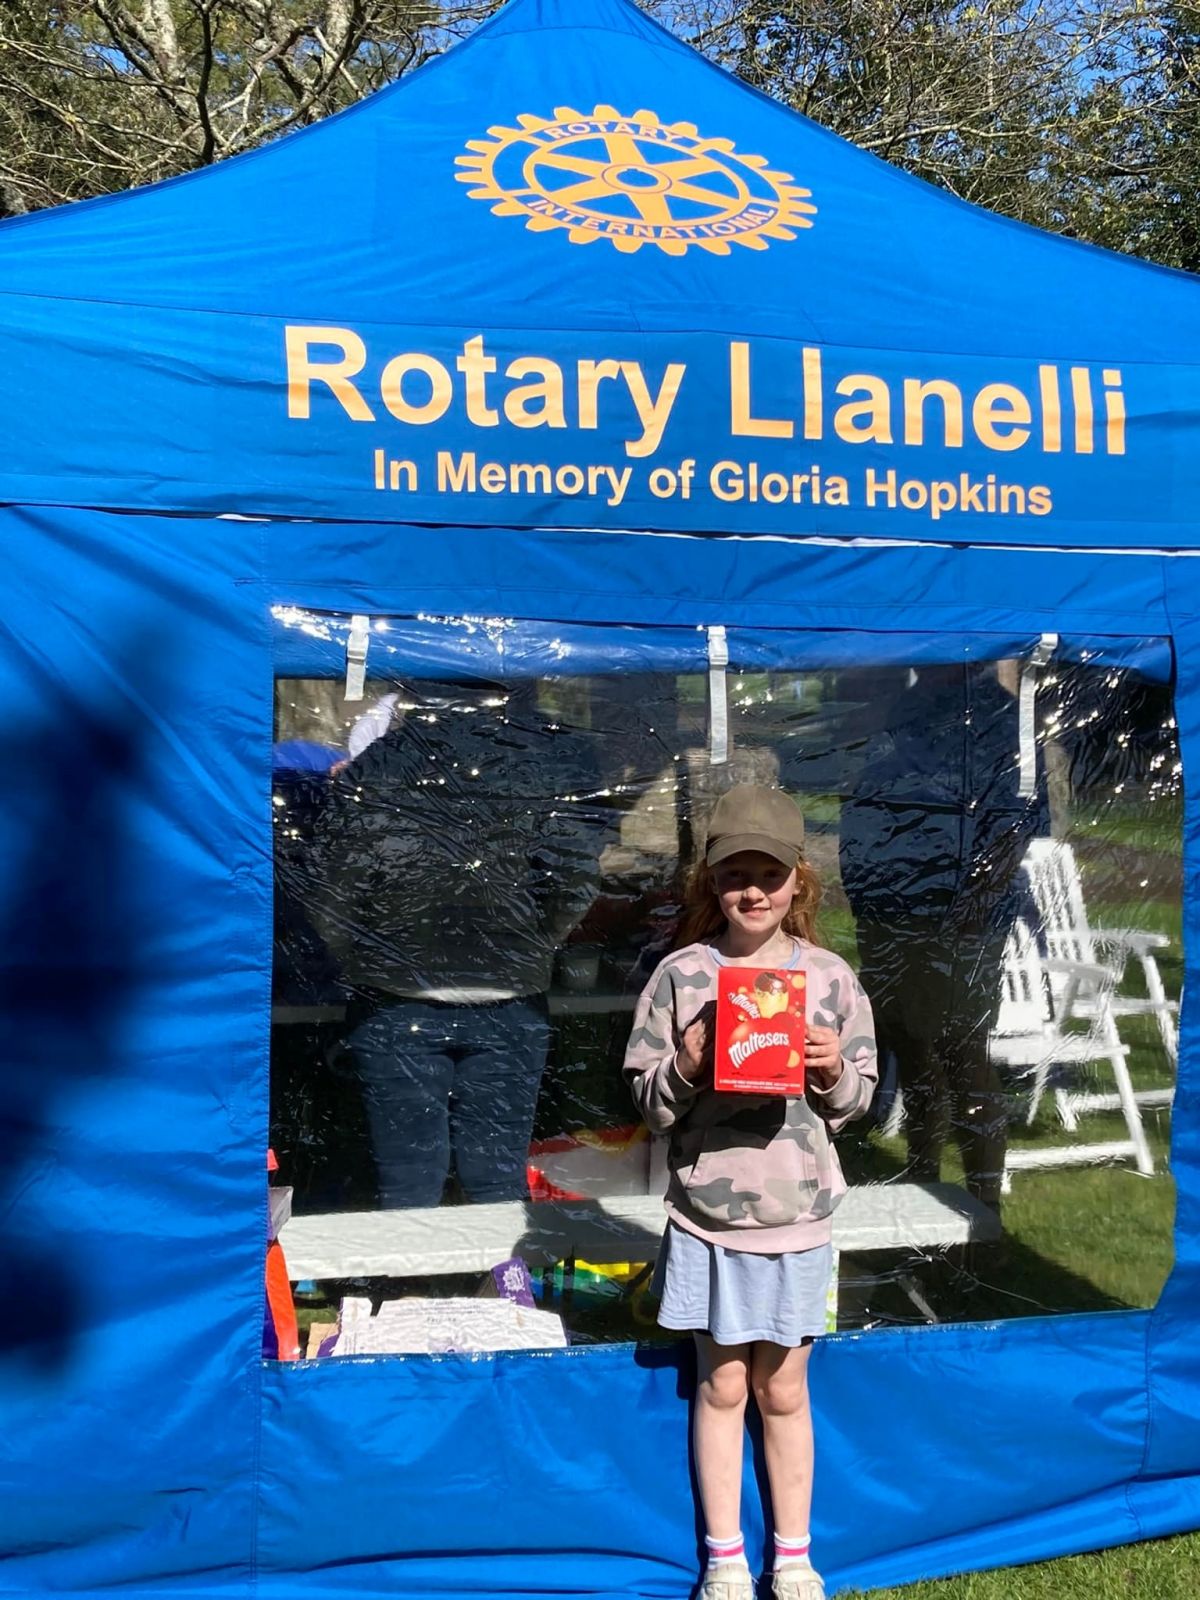 Egg-citing time as Llanelli Rotary stages hunt - 